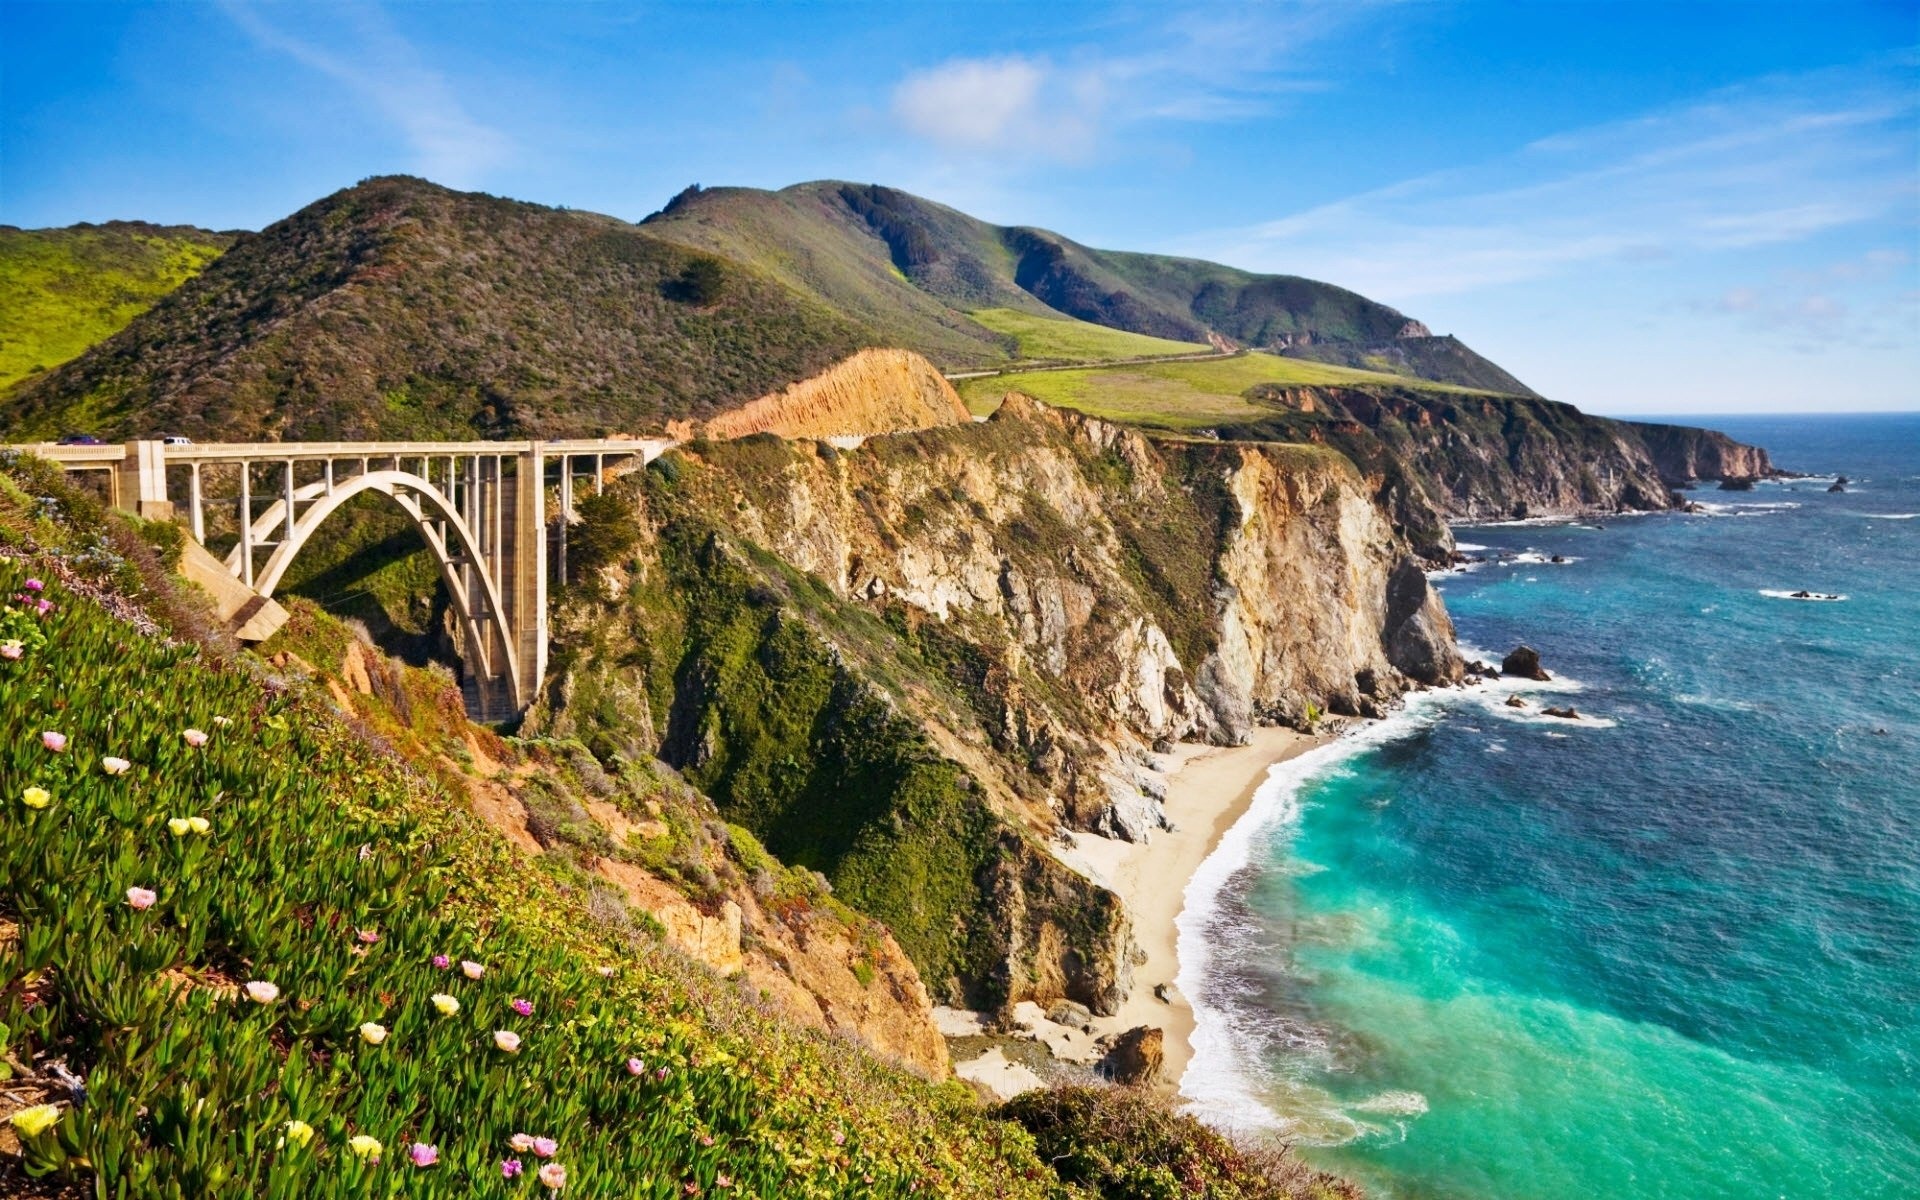 California scenery, High-quality wallpapers, Captivating landscapes, Natural beauty, 1920x1200 HD Desktop